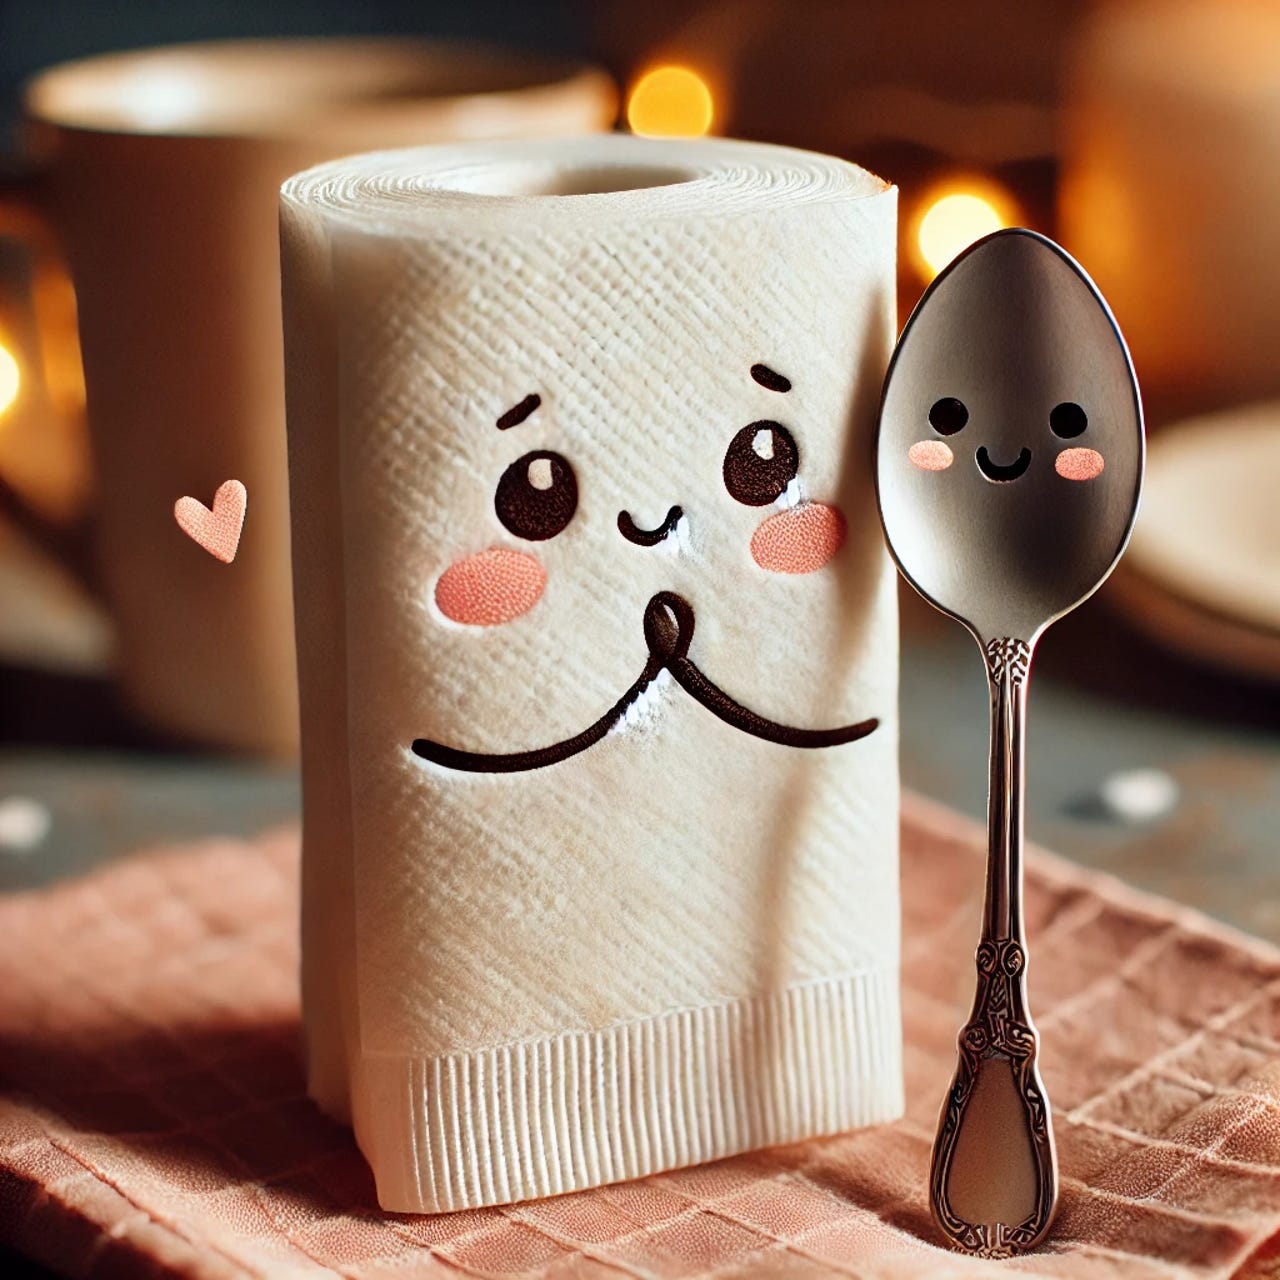 dall-e-a-whimsical-illustration-of-a-napkin-in-love-with-a-spoon